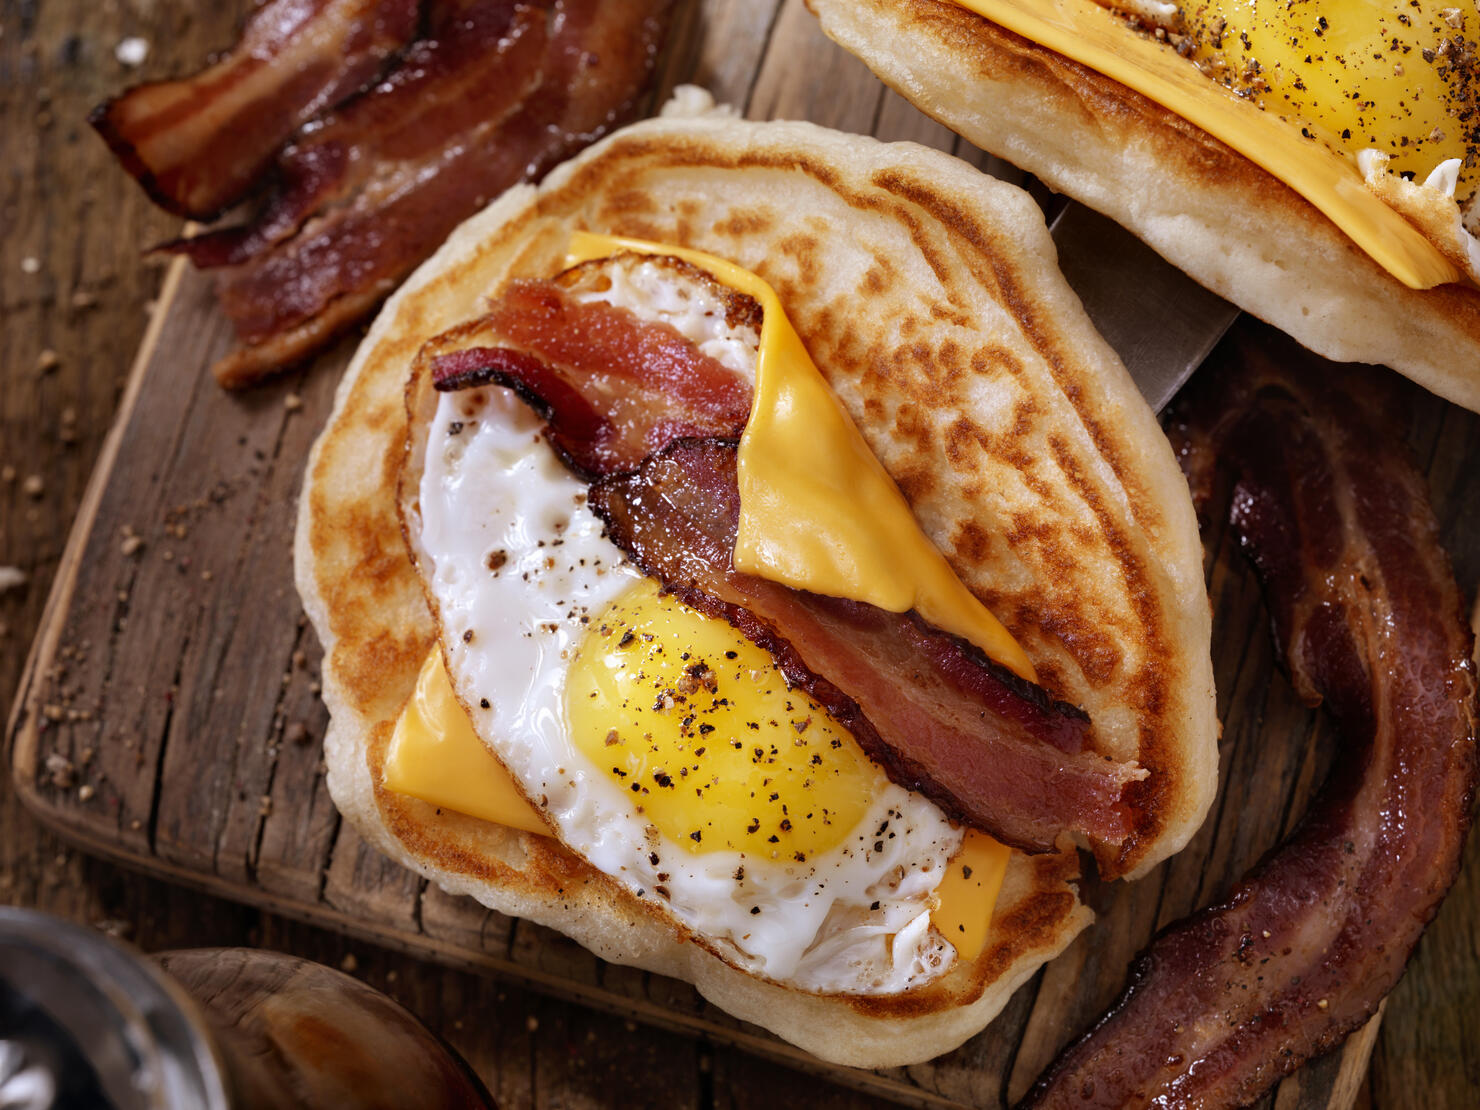 Pancake Breakfast Taco with Suny side up Eggs, Bacon, Cheese